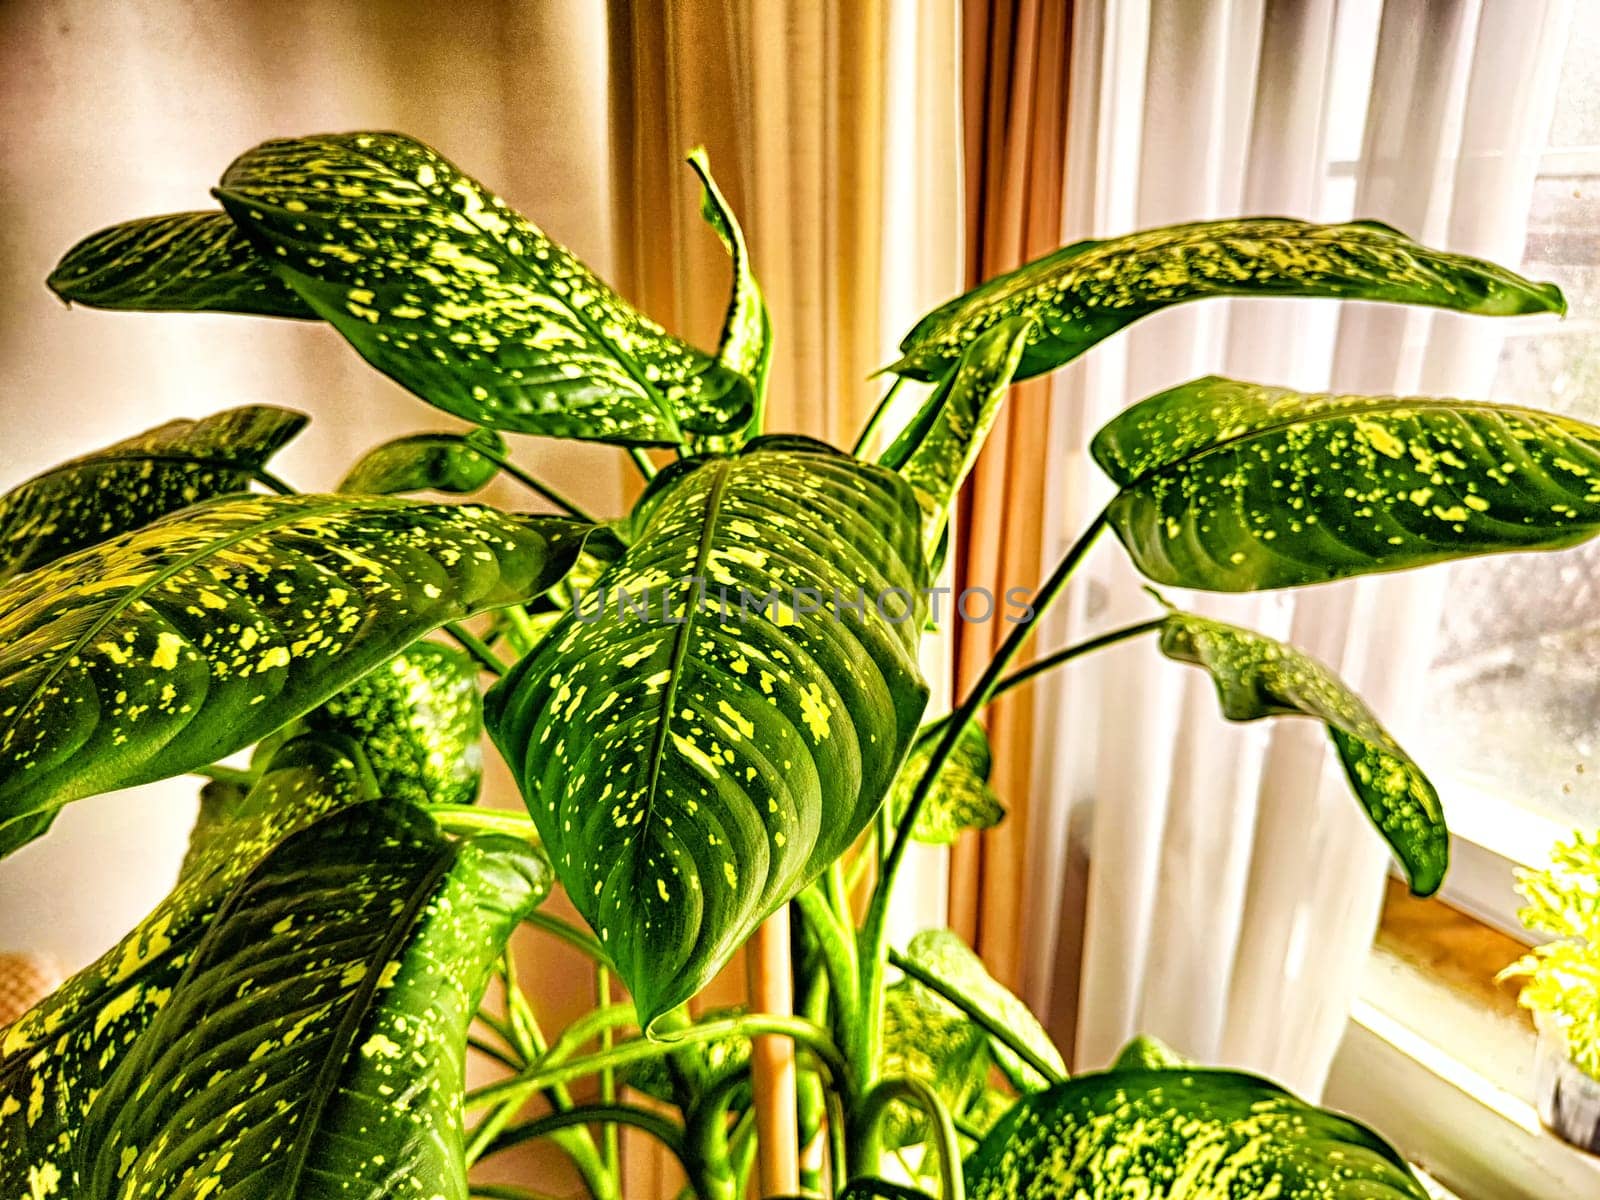 Dieffenbachia plant in a pot on a stool by the window. Retro interior in light colors. Background with plant with green leaves and fabric